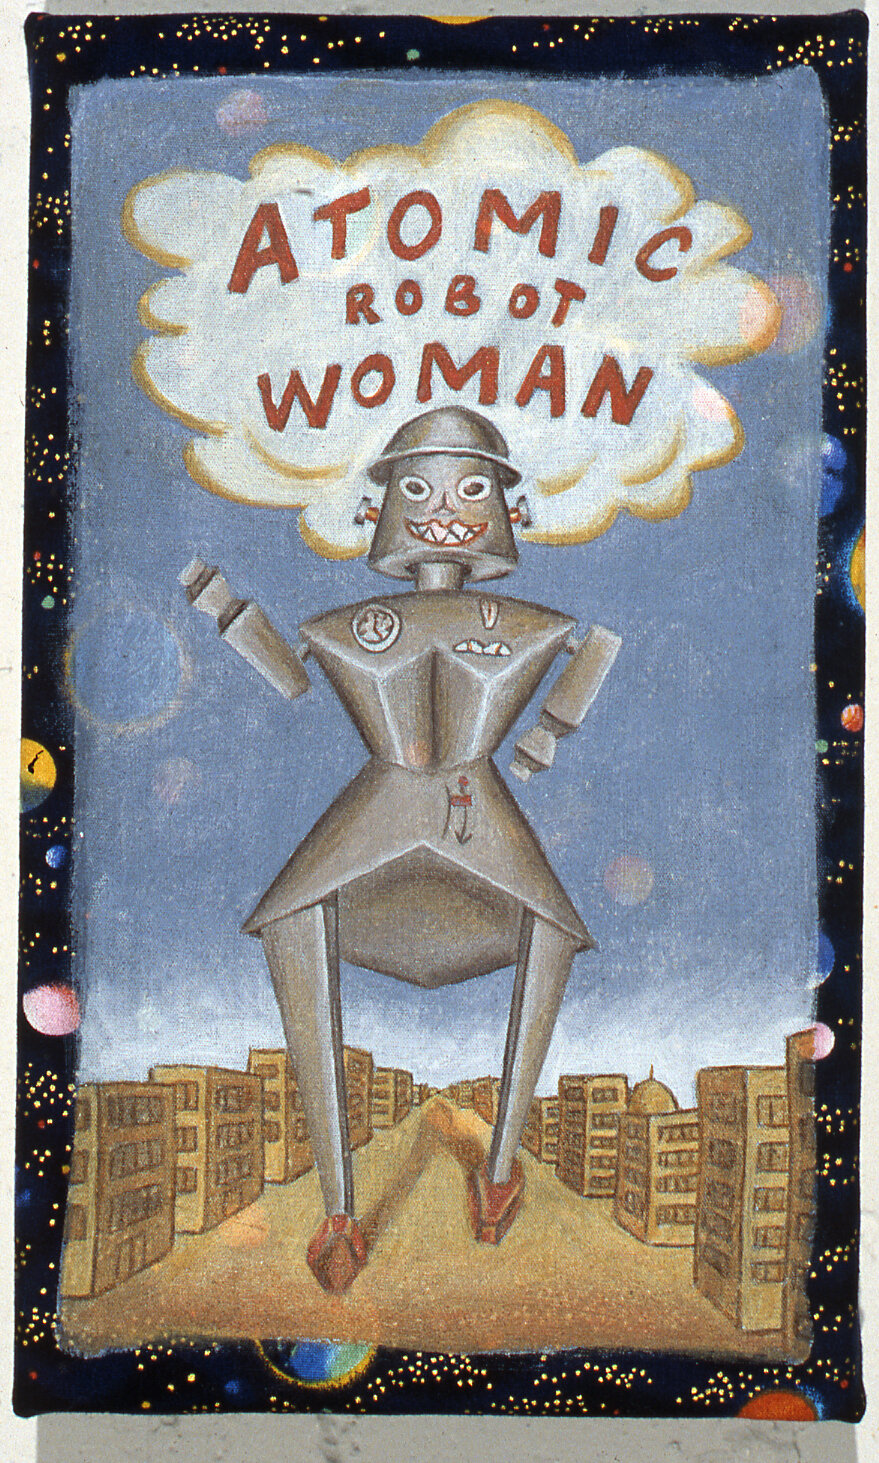   Atomic Robot Woman   10”x6”  acrylic on commercially printed fabric  1995  PRIVATE COLLECTION 